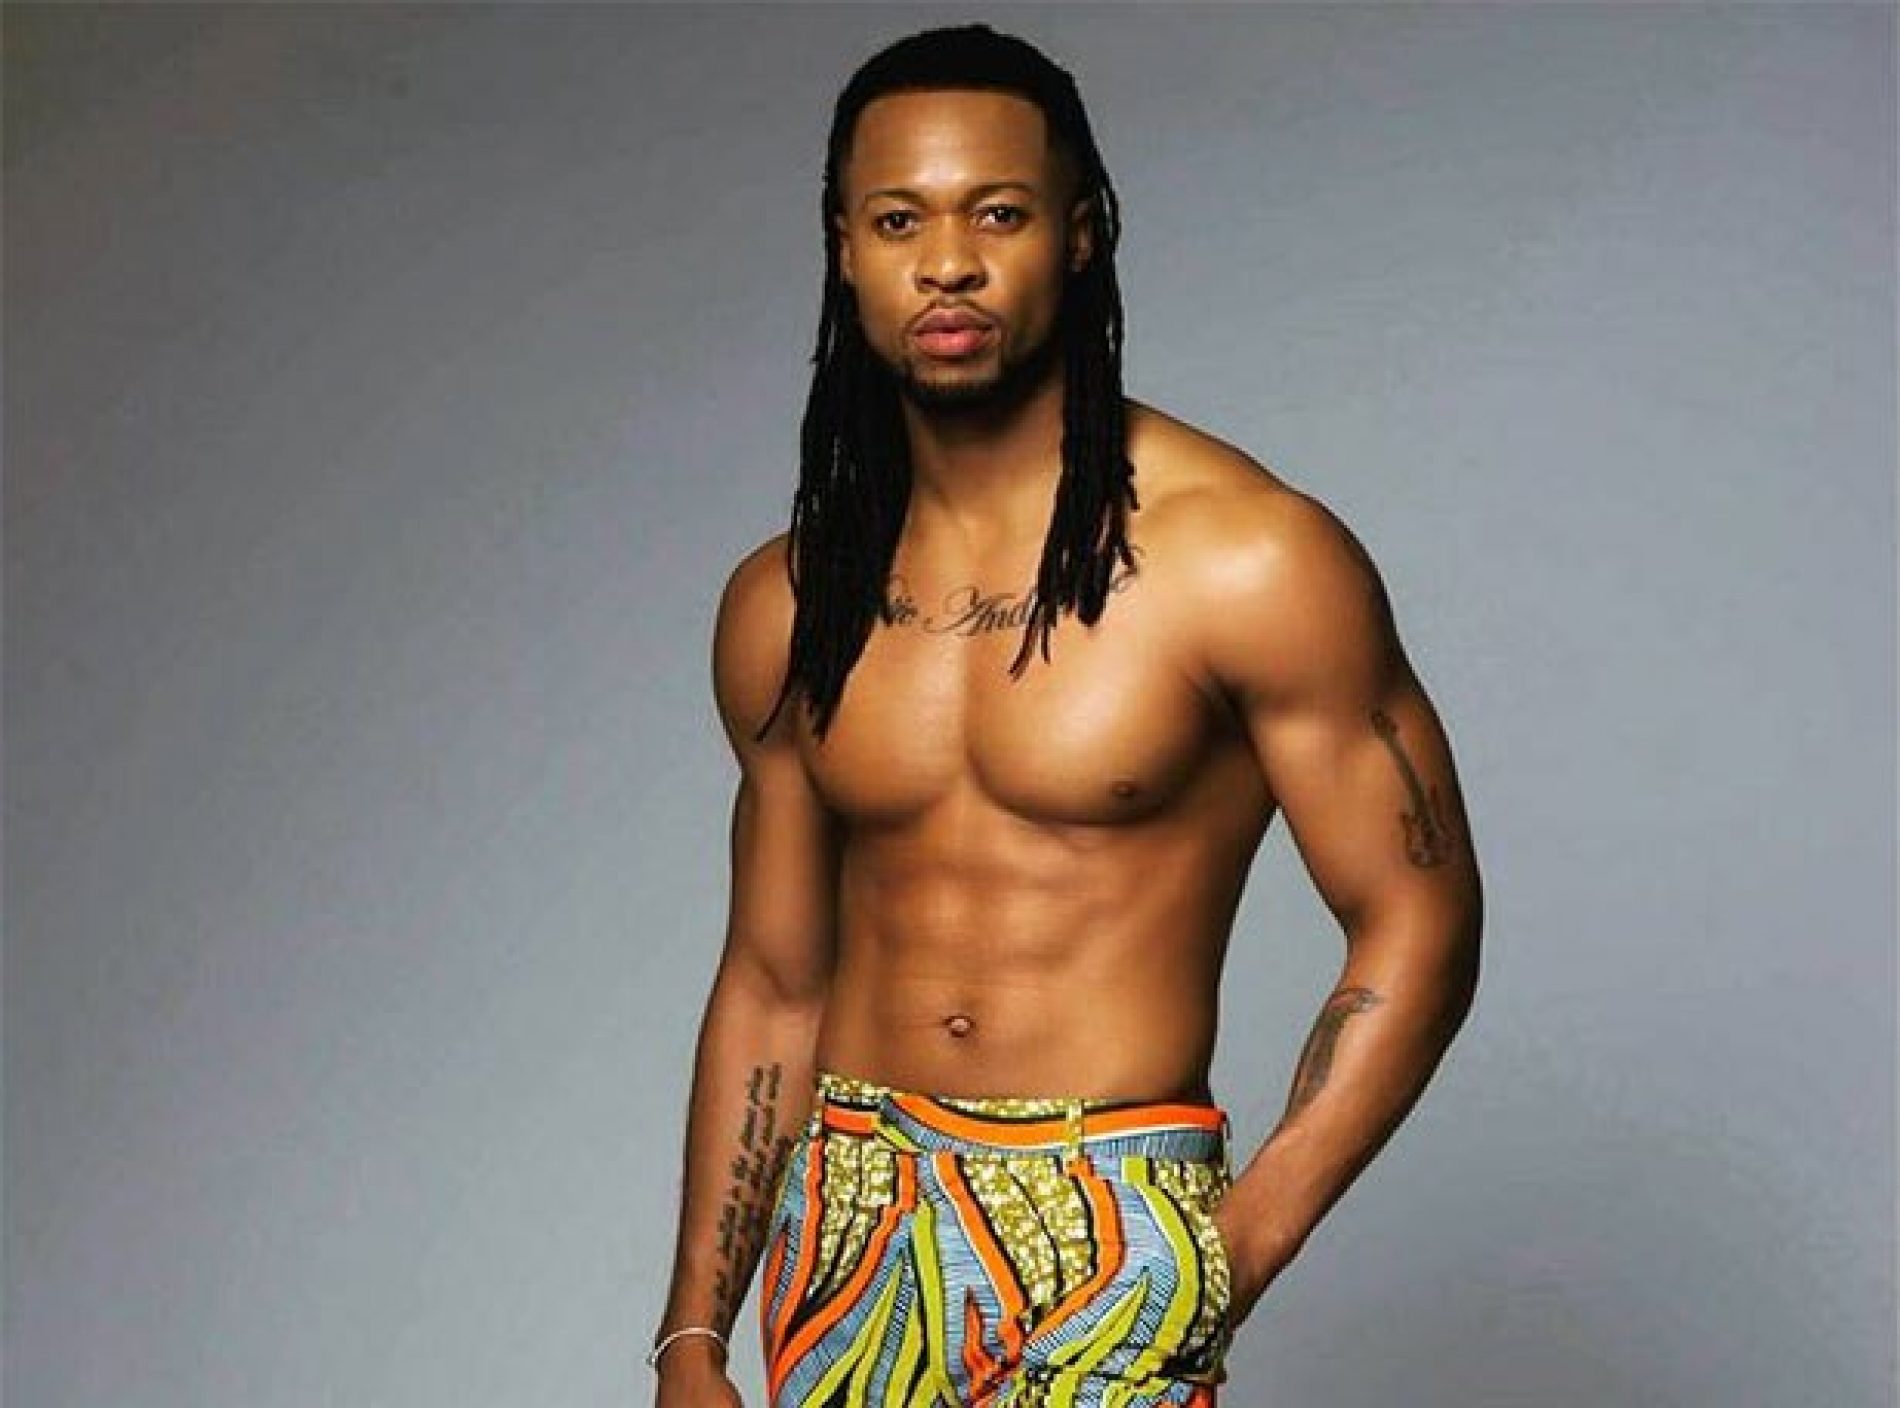 “Is it just me or is Flavour gay?” Instagram troll comes for singer Flavour, incurs the wrath of his fans